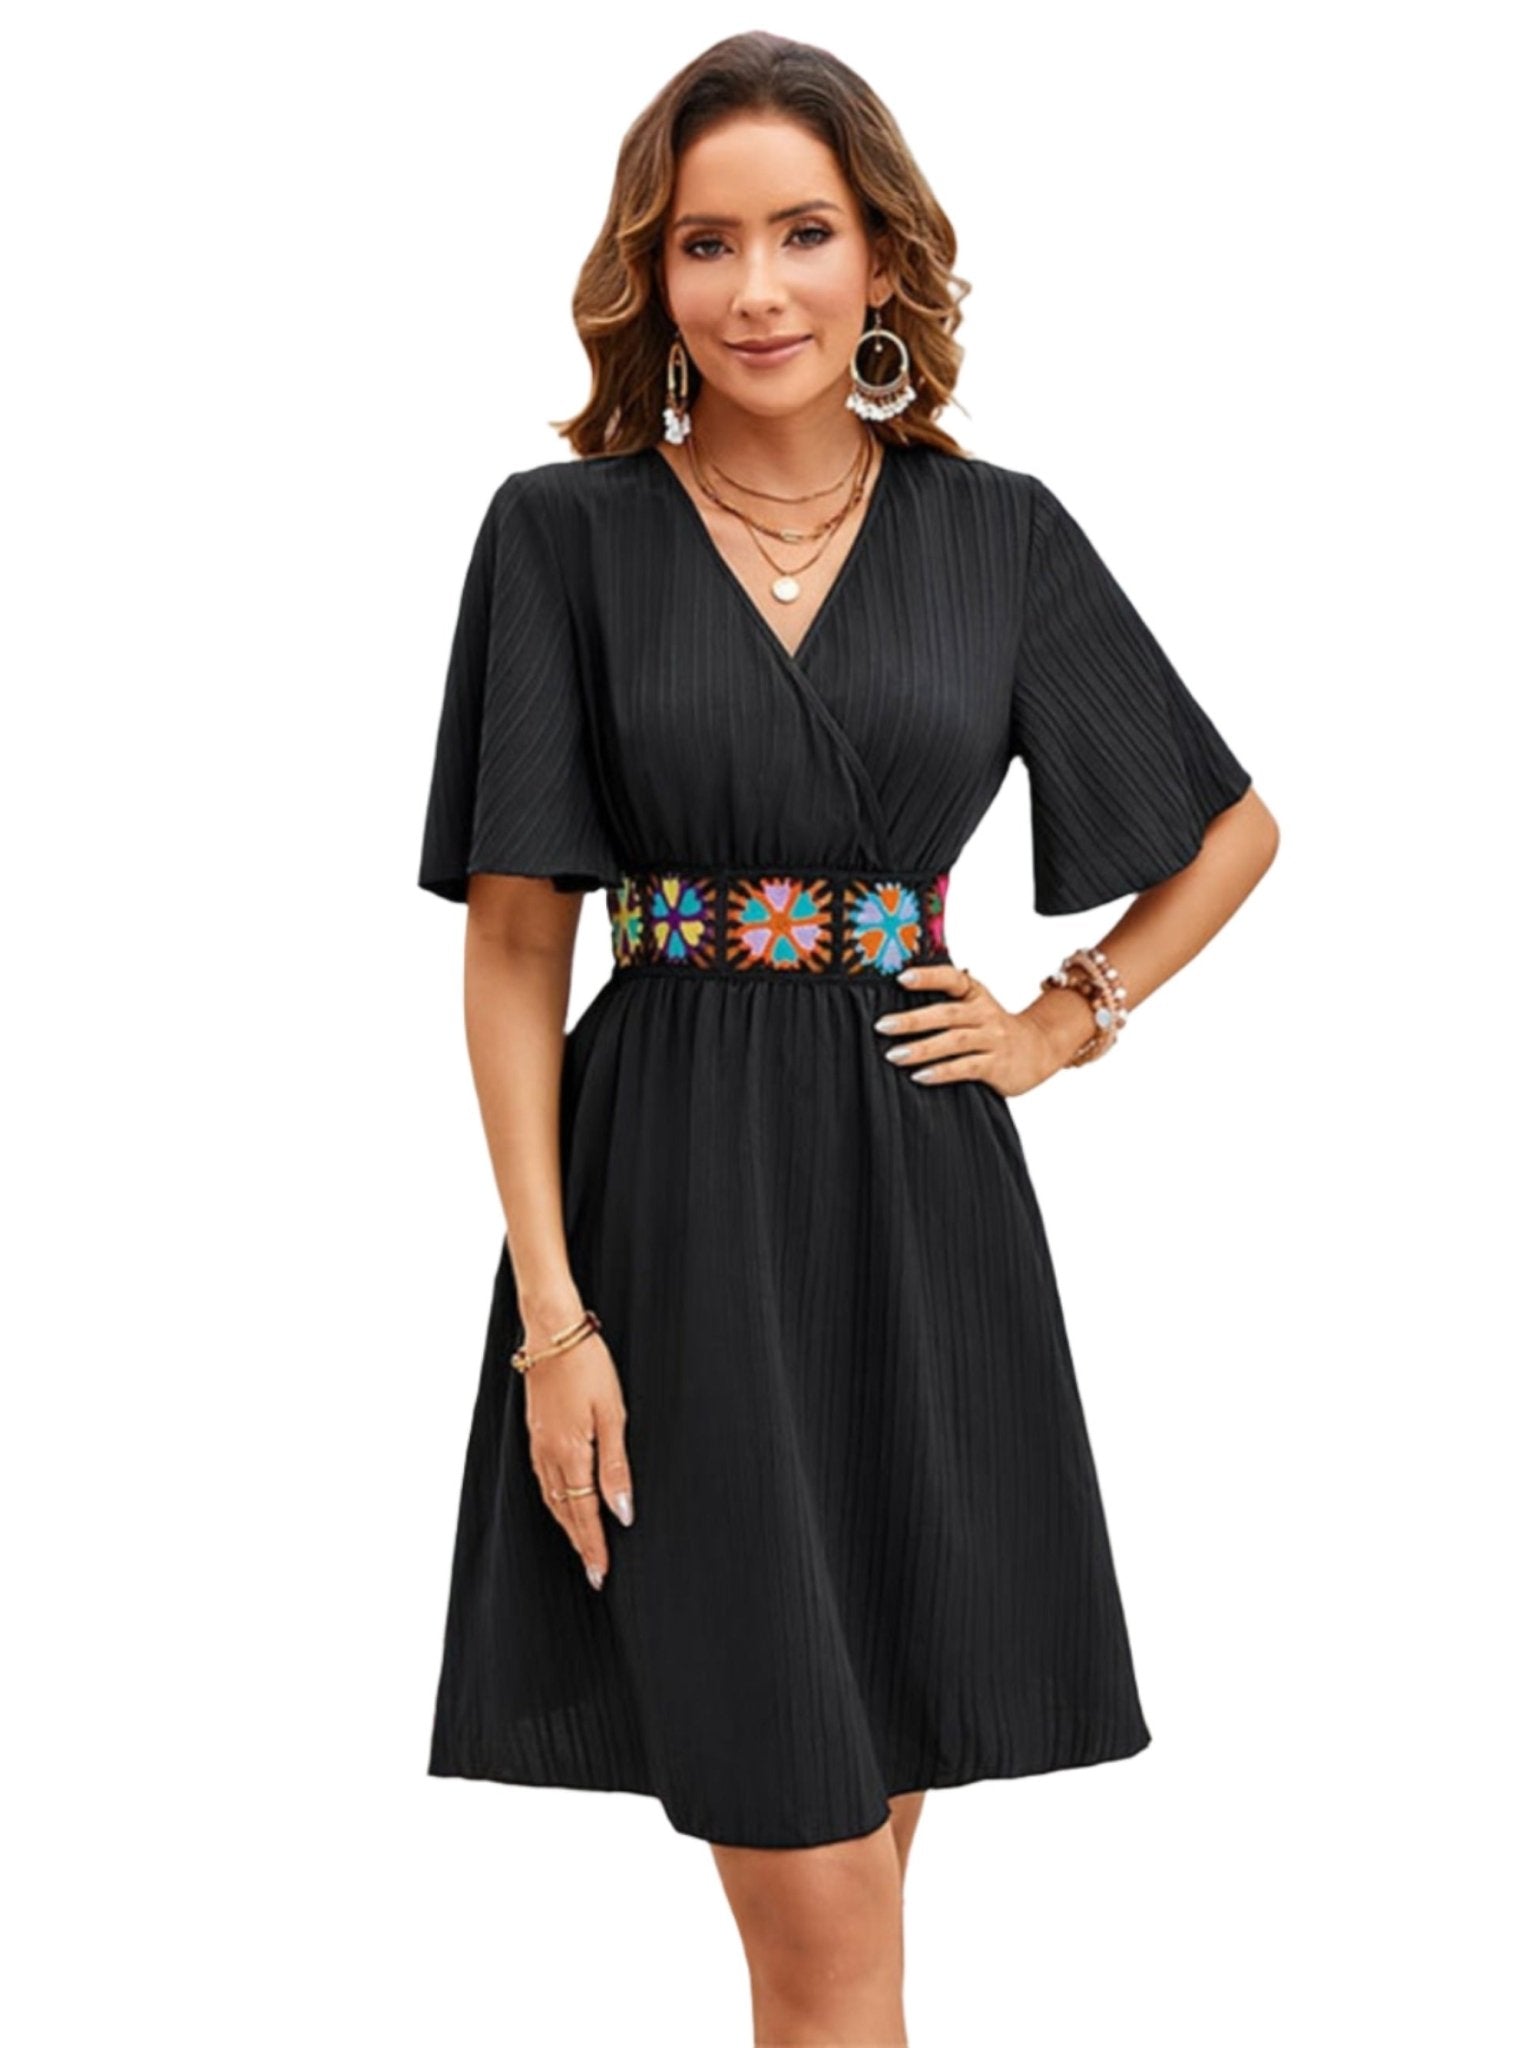 The image is showcasing a Surplice Flutter Sleeve Mini Dress for Women Casual Summer Dress at Mommy & Lino's Closet